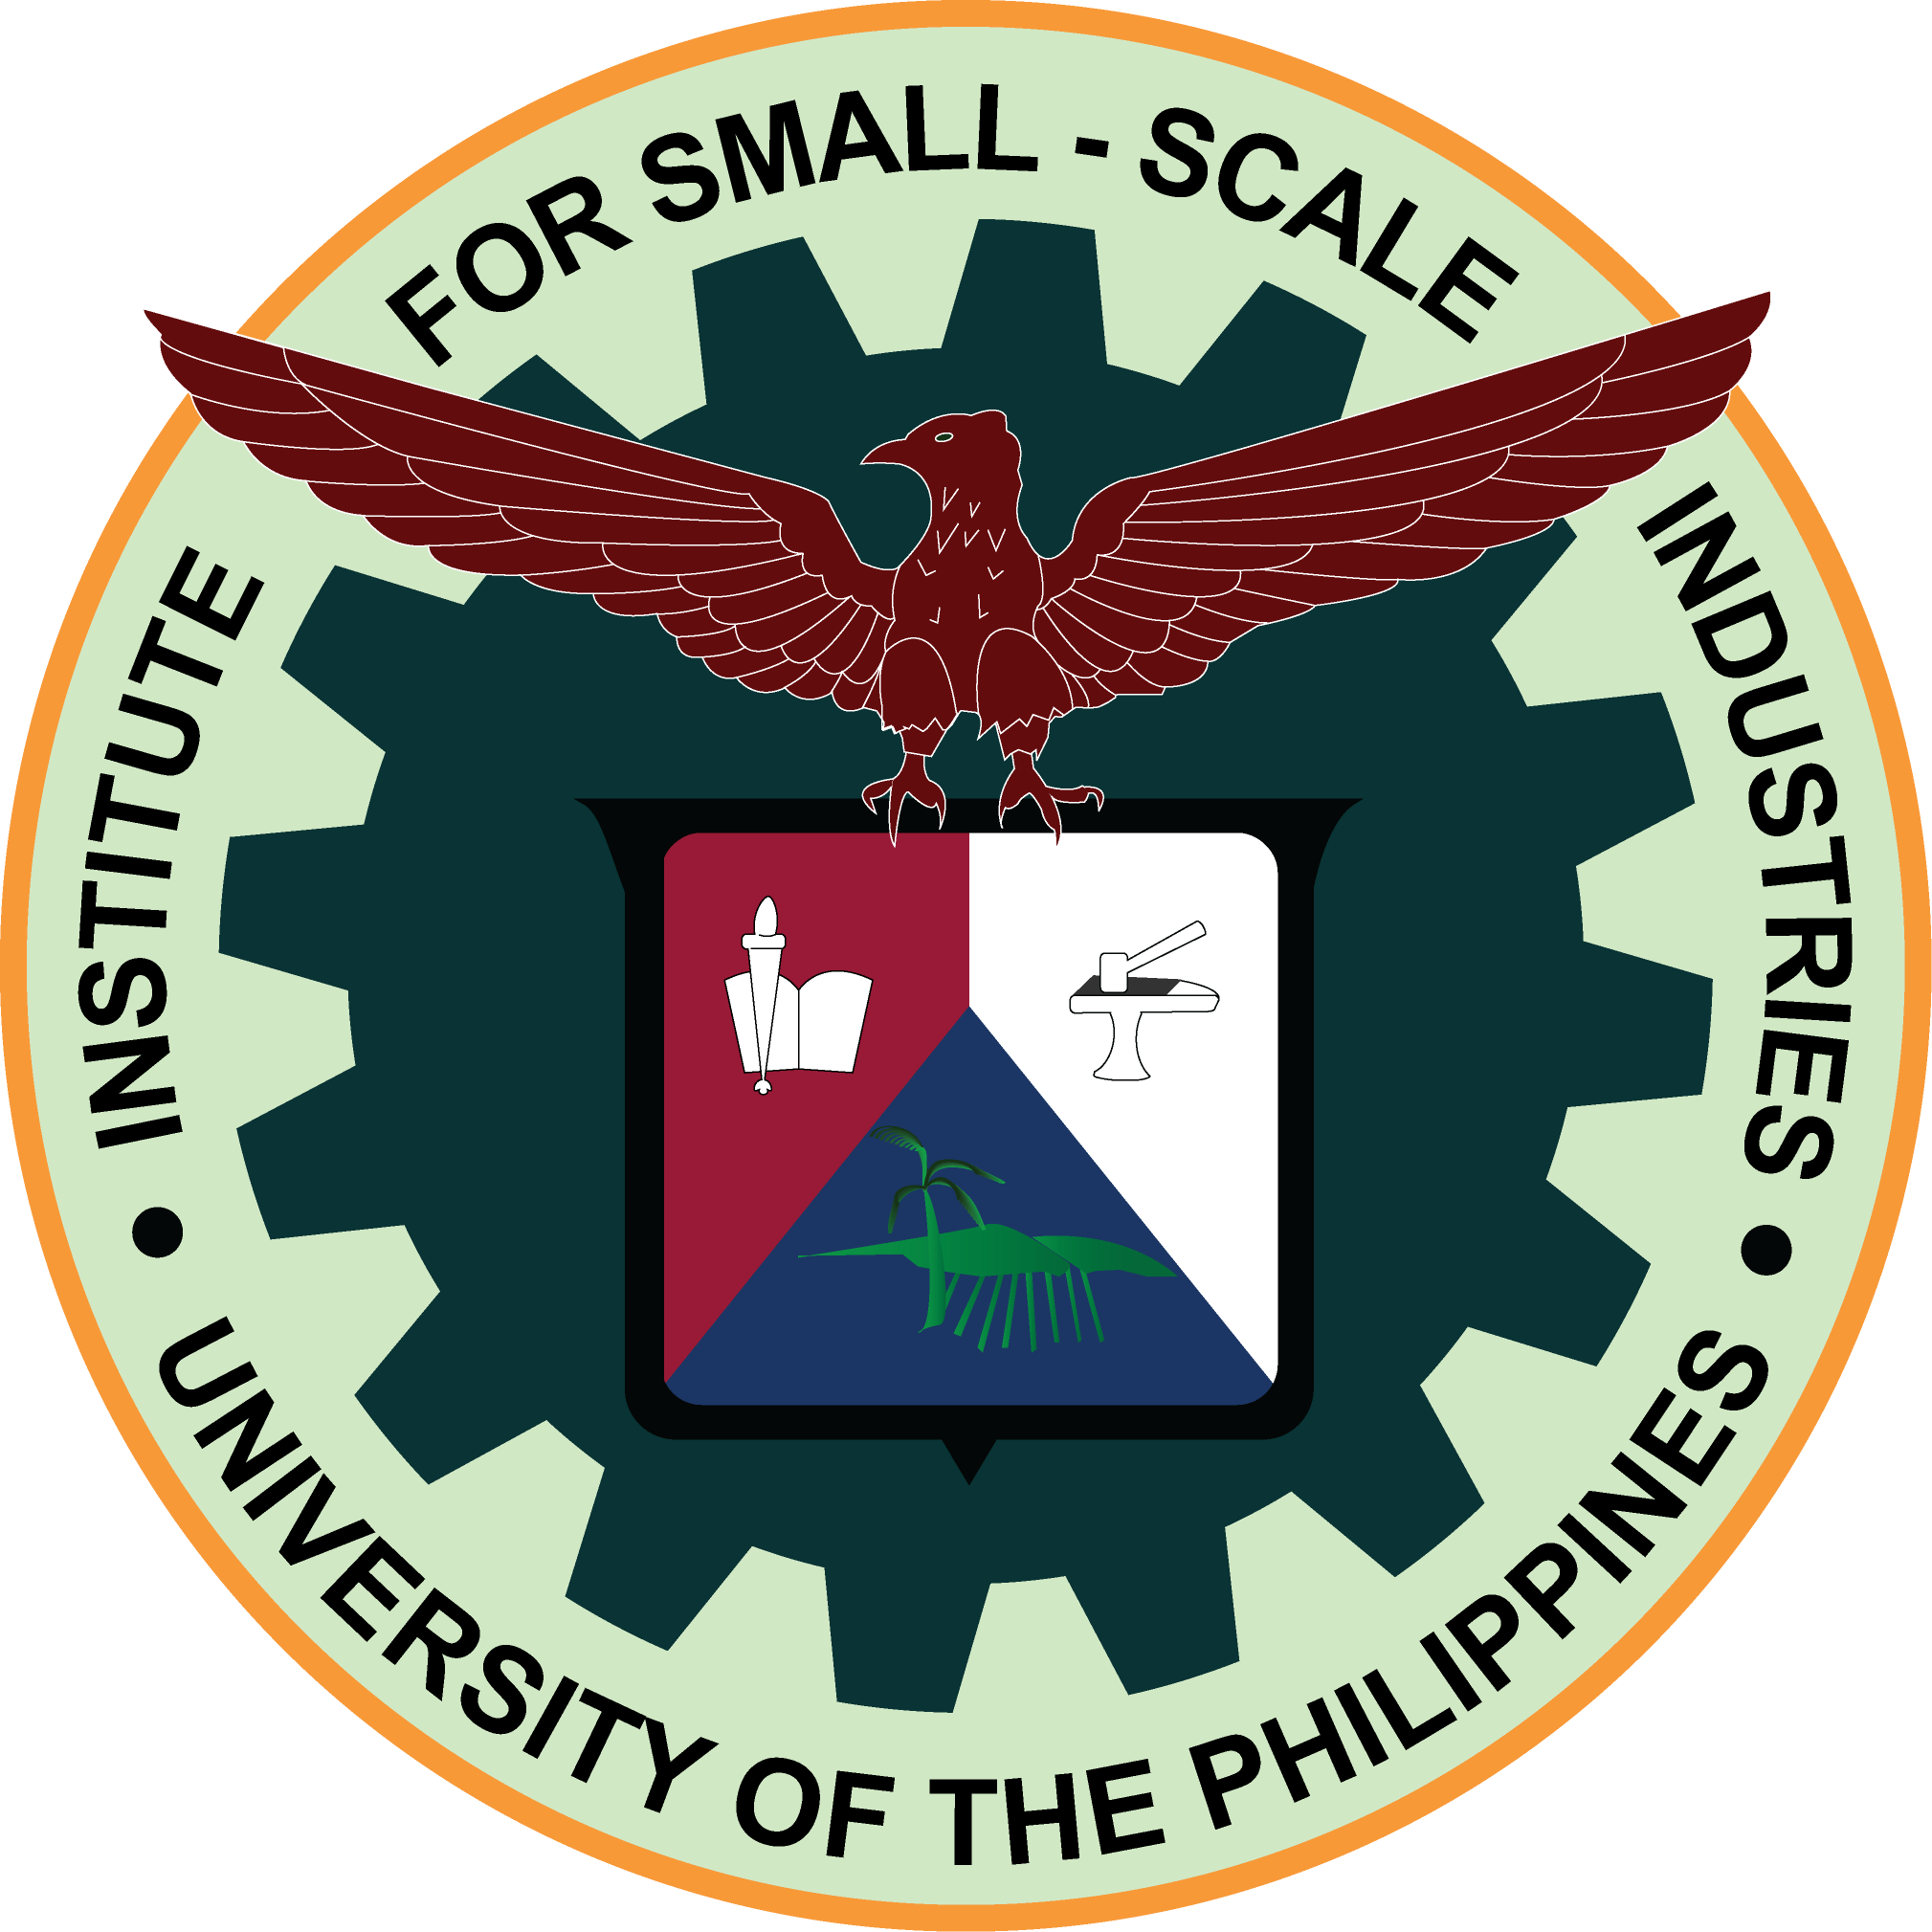 The official Twitter account of the University of the Philippines Institute for Small-Scale Industries